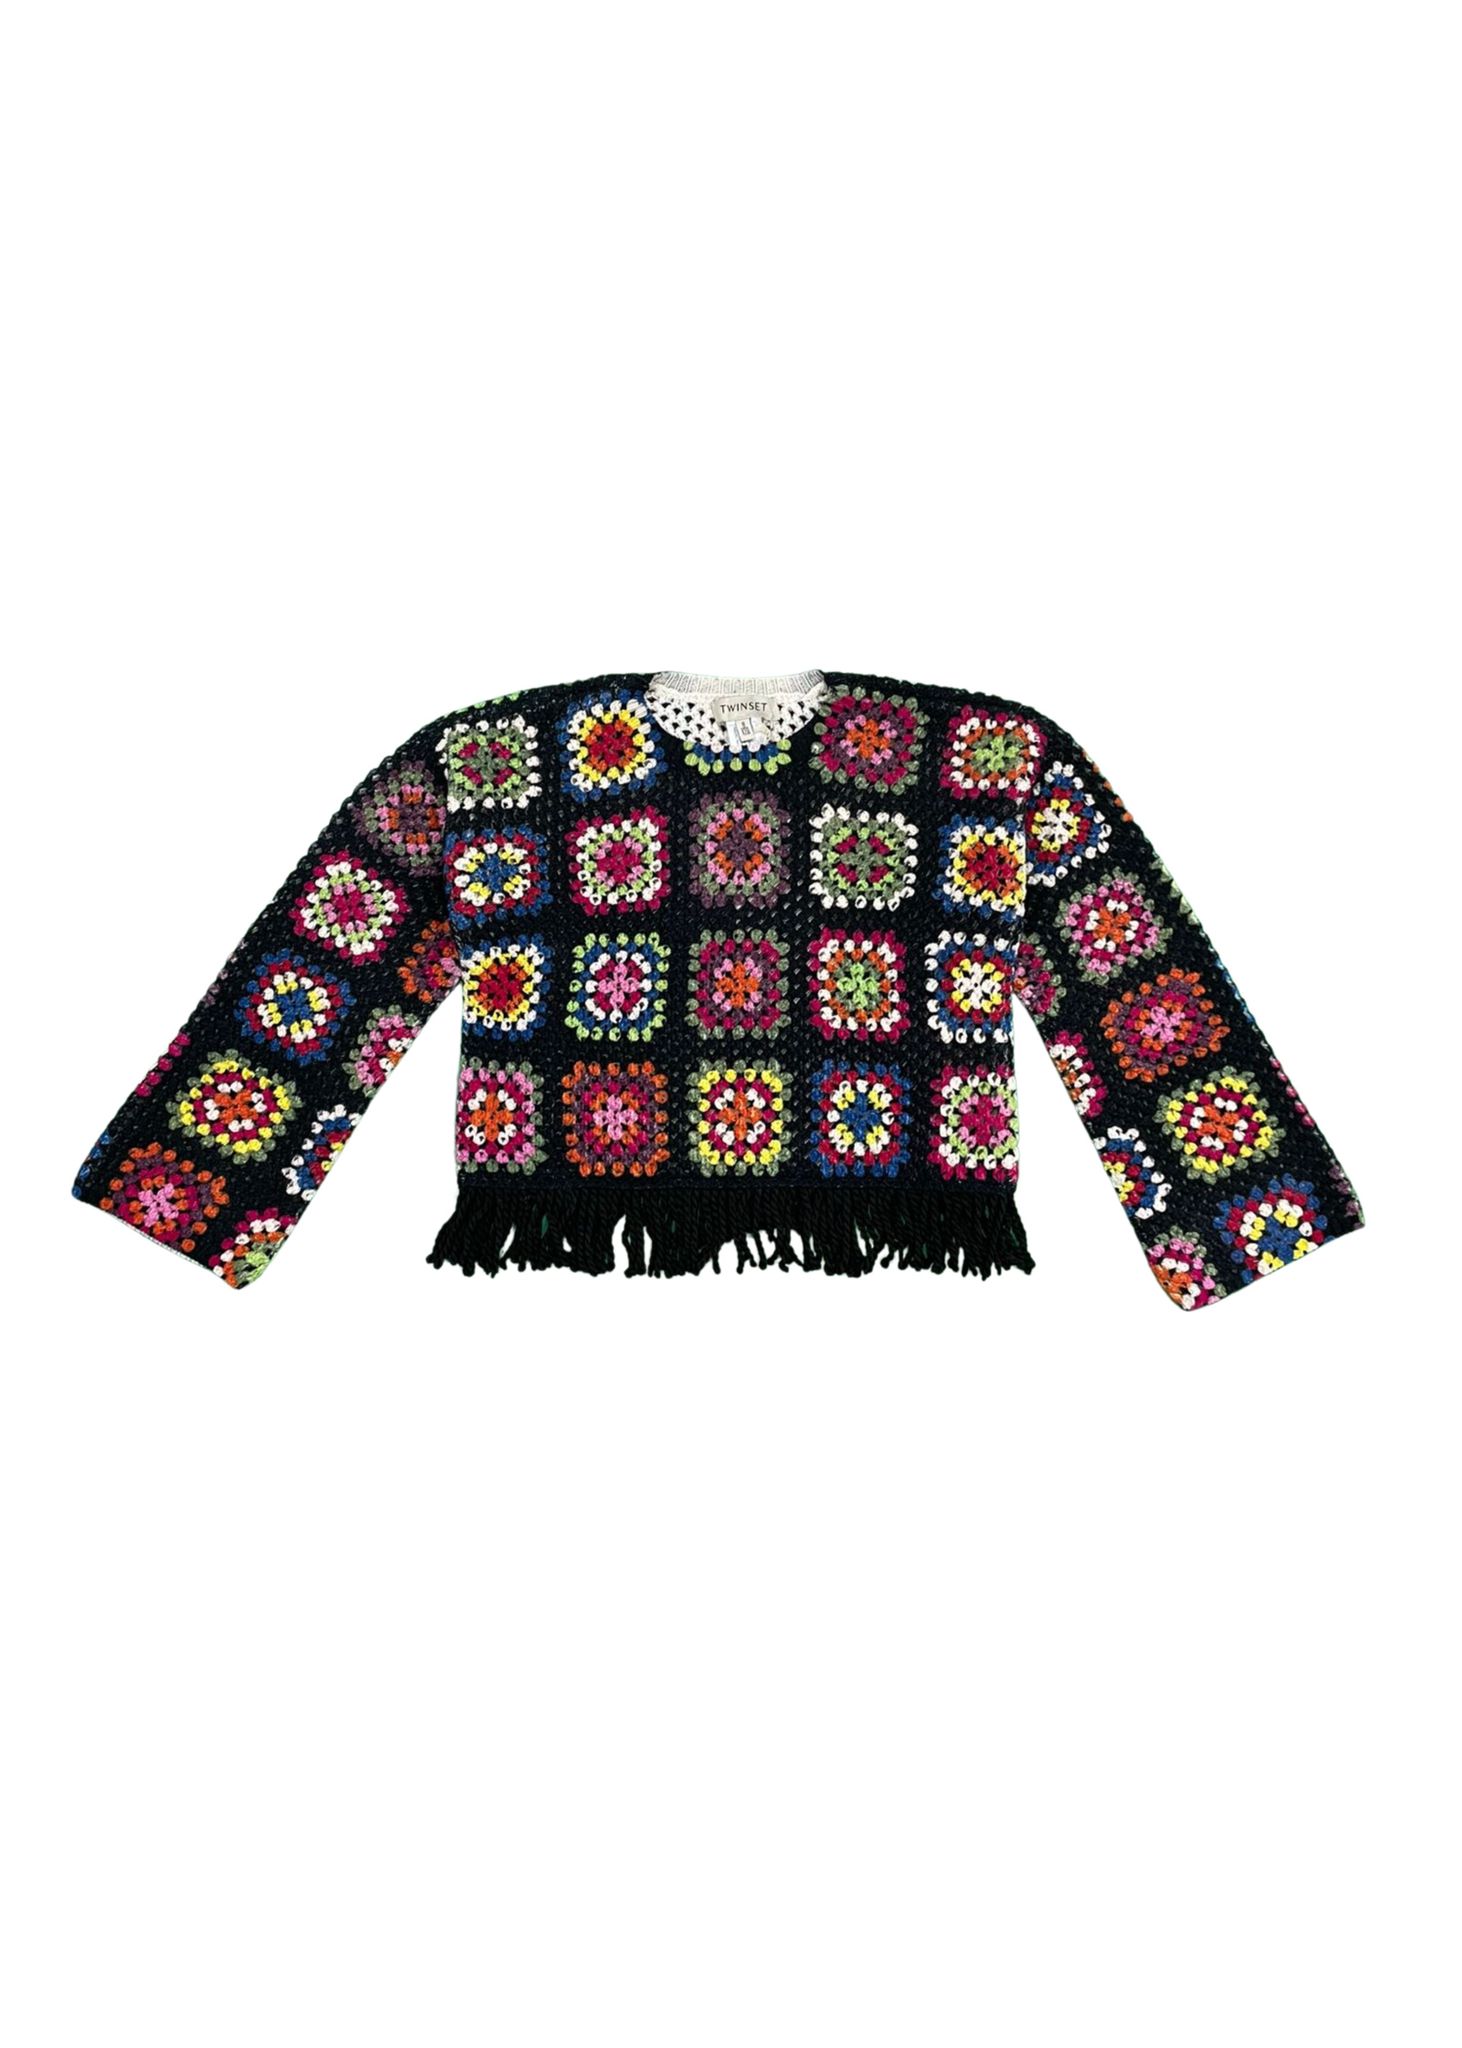 Featured image for “twinset Maglione Crochet”